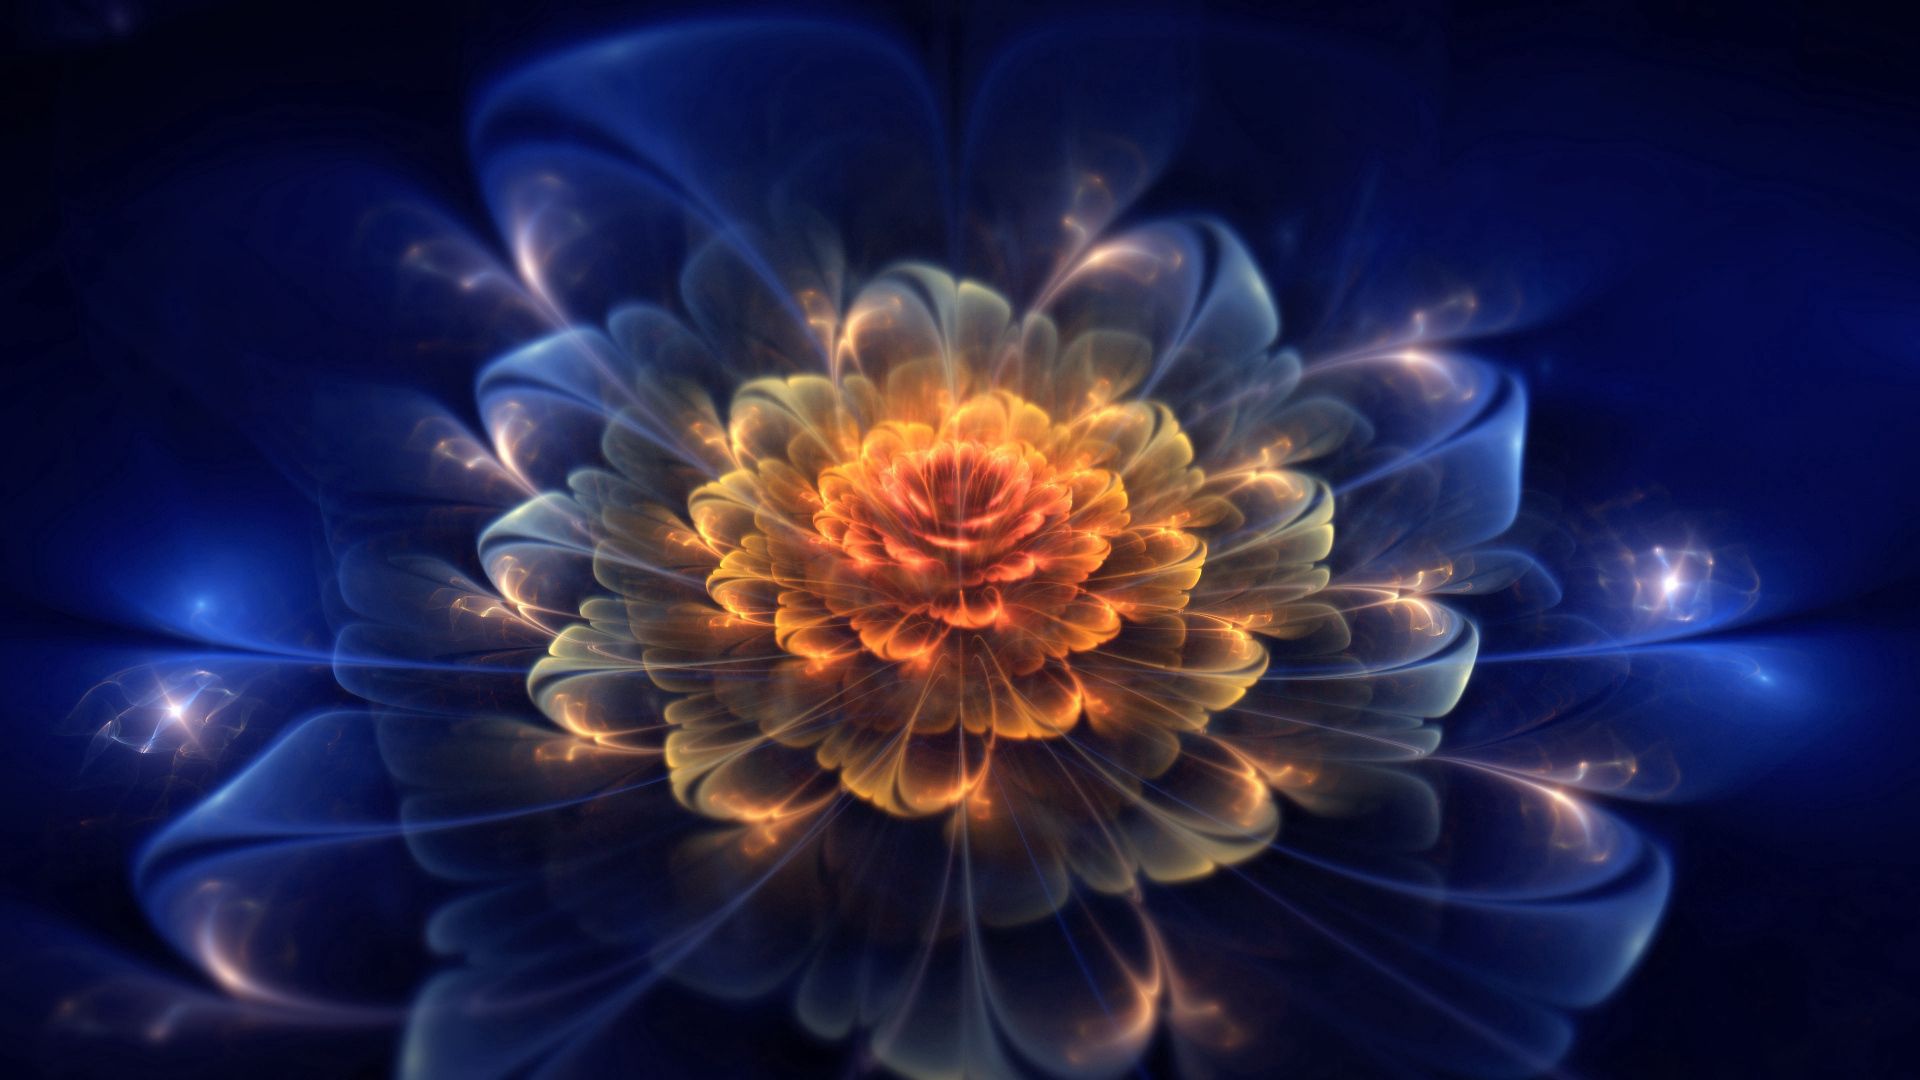 Wallpaper for mobile devices flower, light, abstract, shine